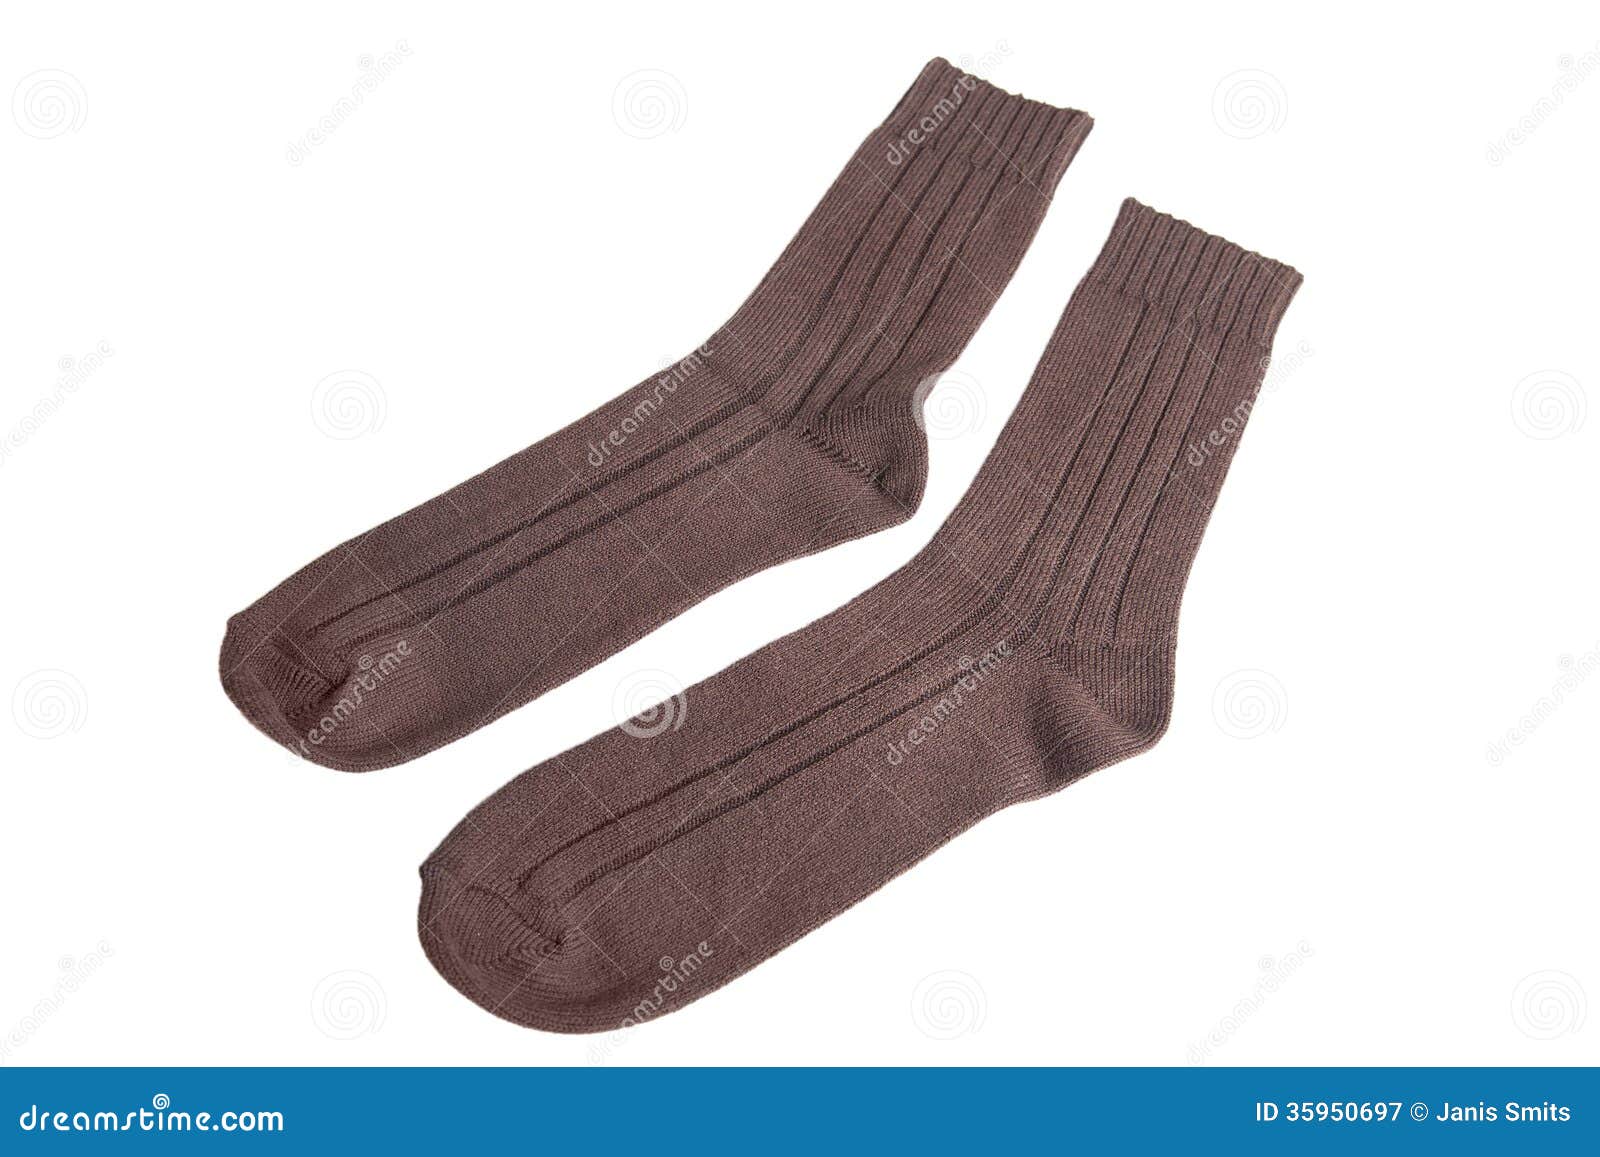 New socks. stock image. Image of texture, fashion, clothes - 35950697